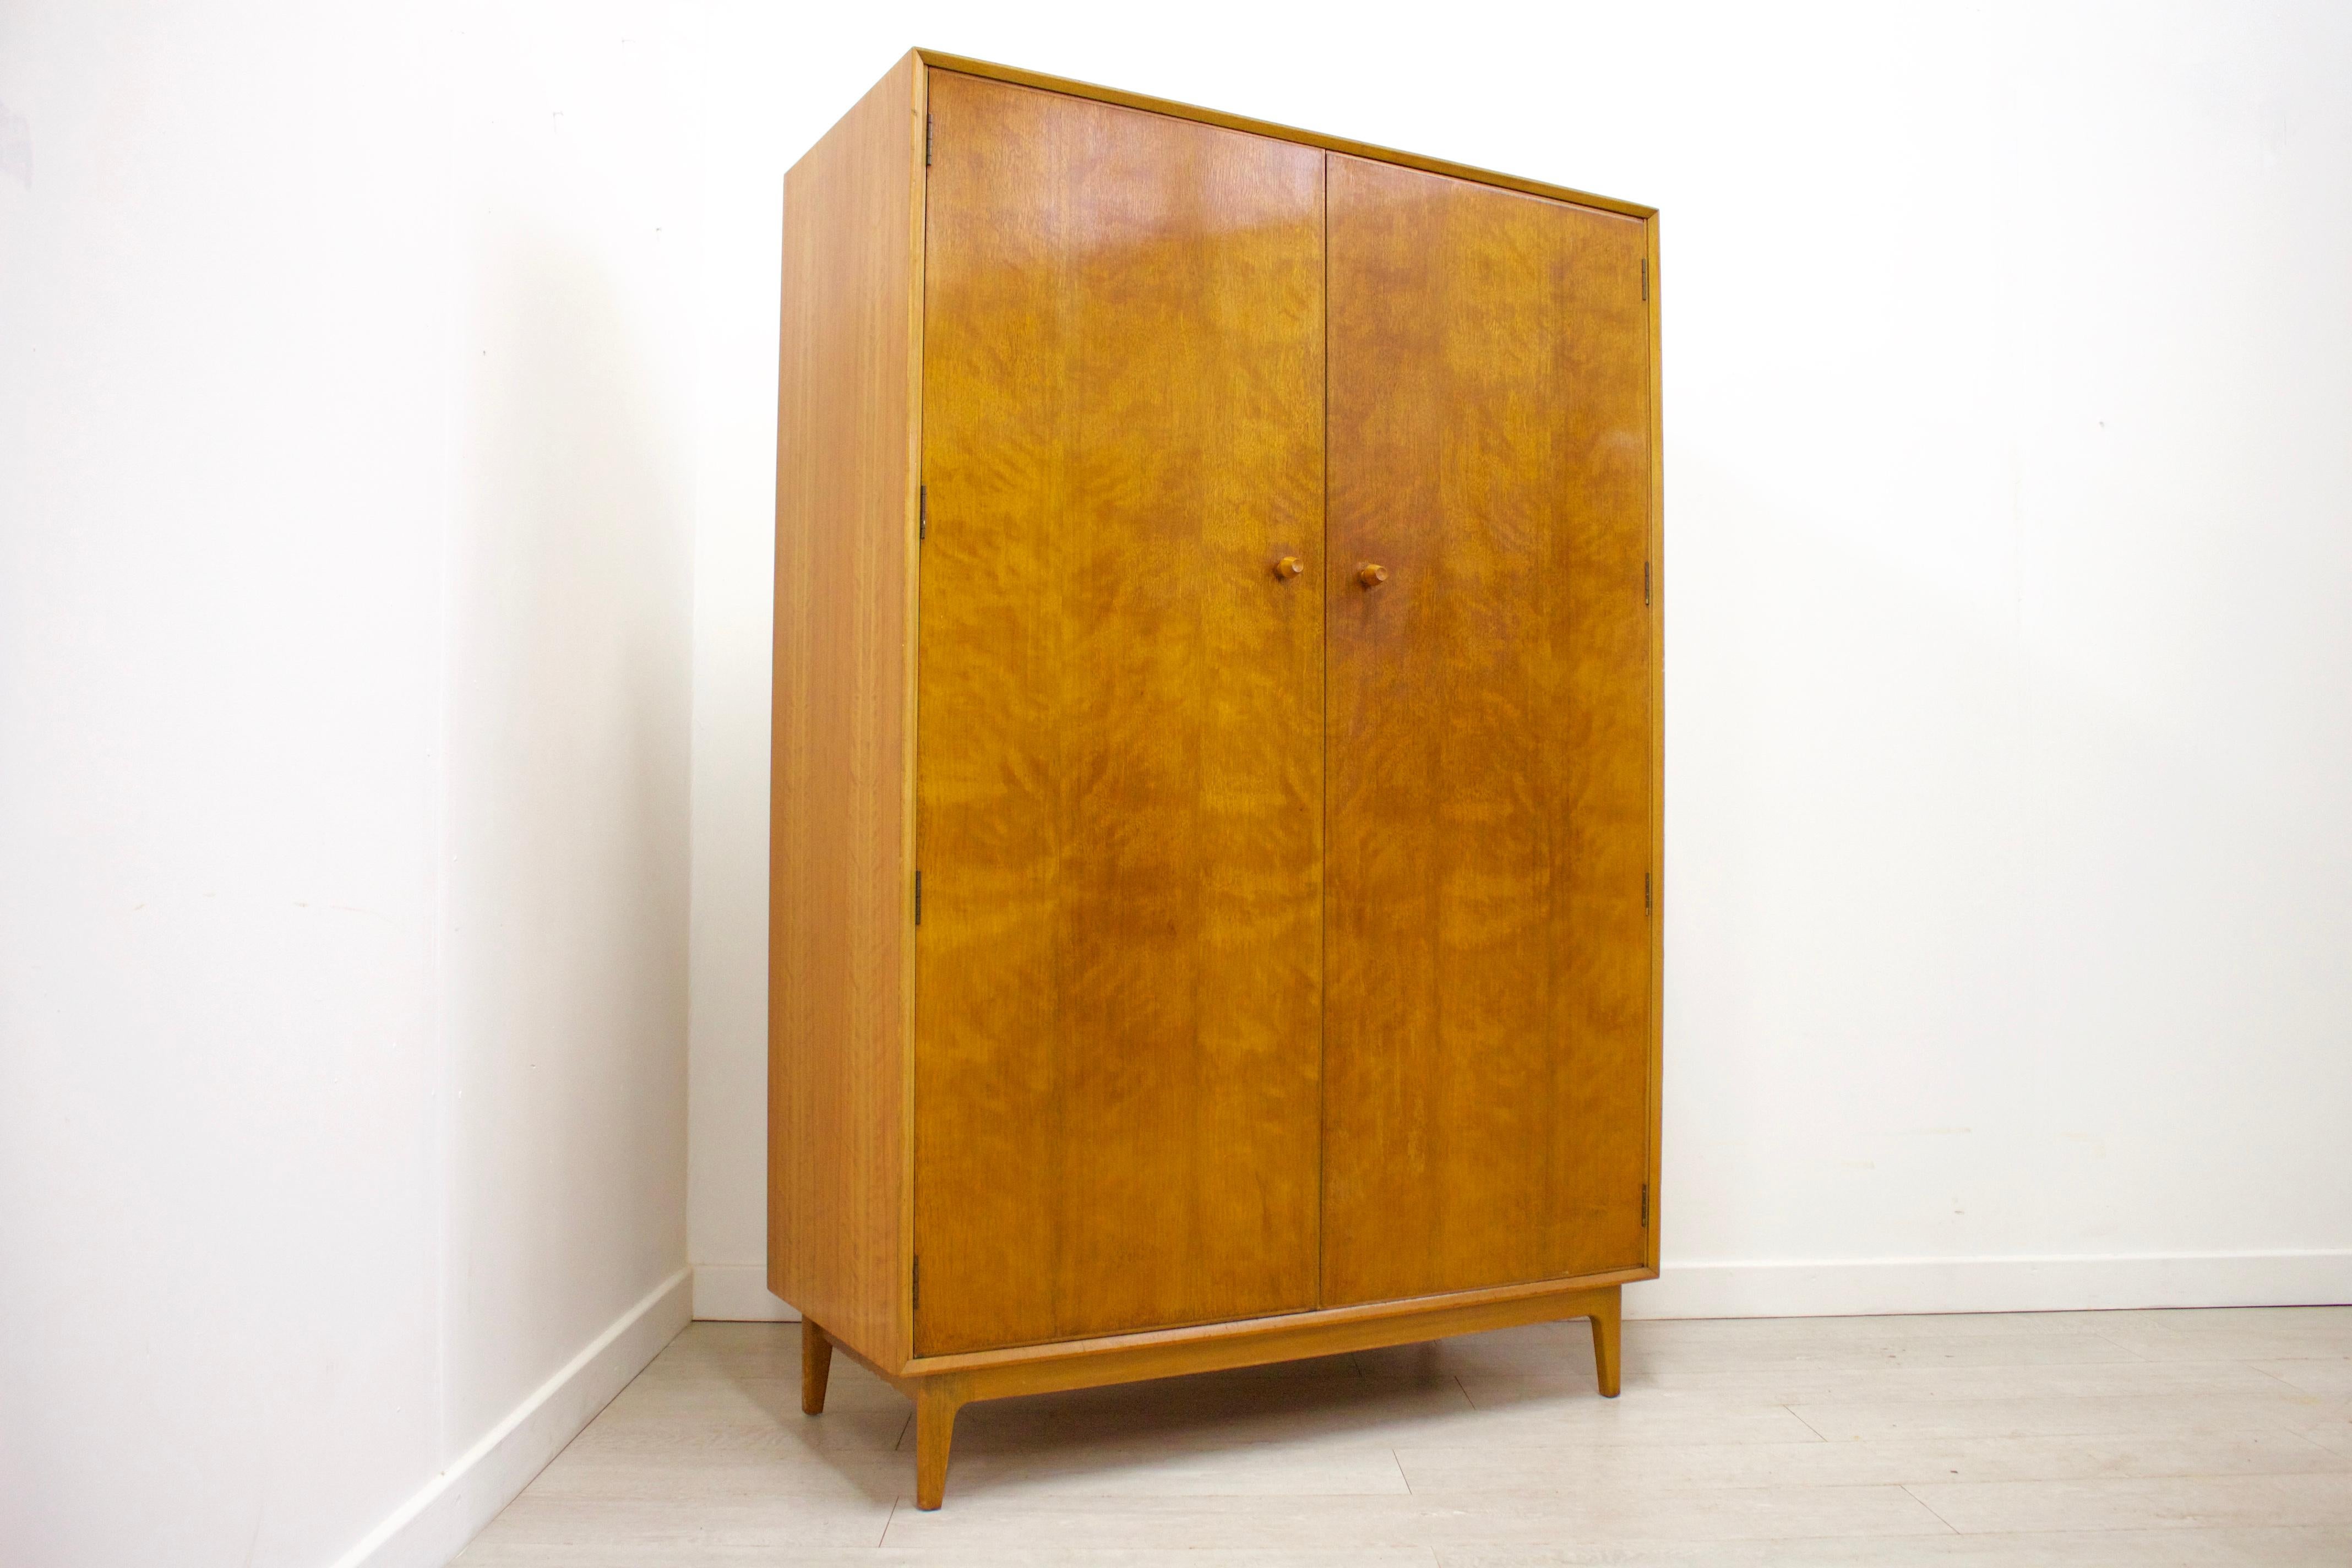 This is a very stylish solid teak and walnut veneer wardrobe by Gimson & Slater for Vesper.

This wardrobe features a hanging rail to the left side, and shelves to the right for ample storage.